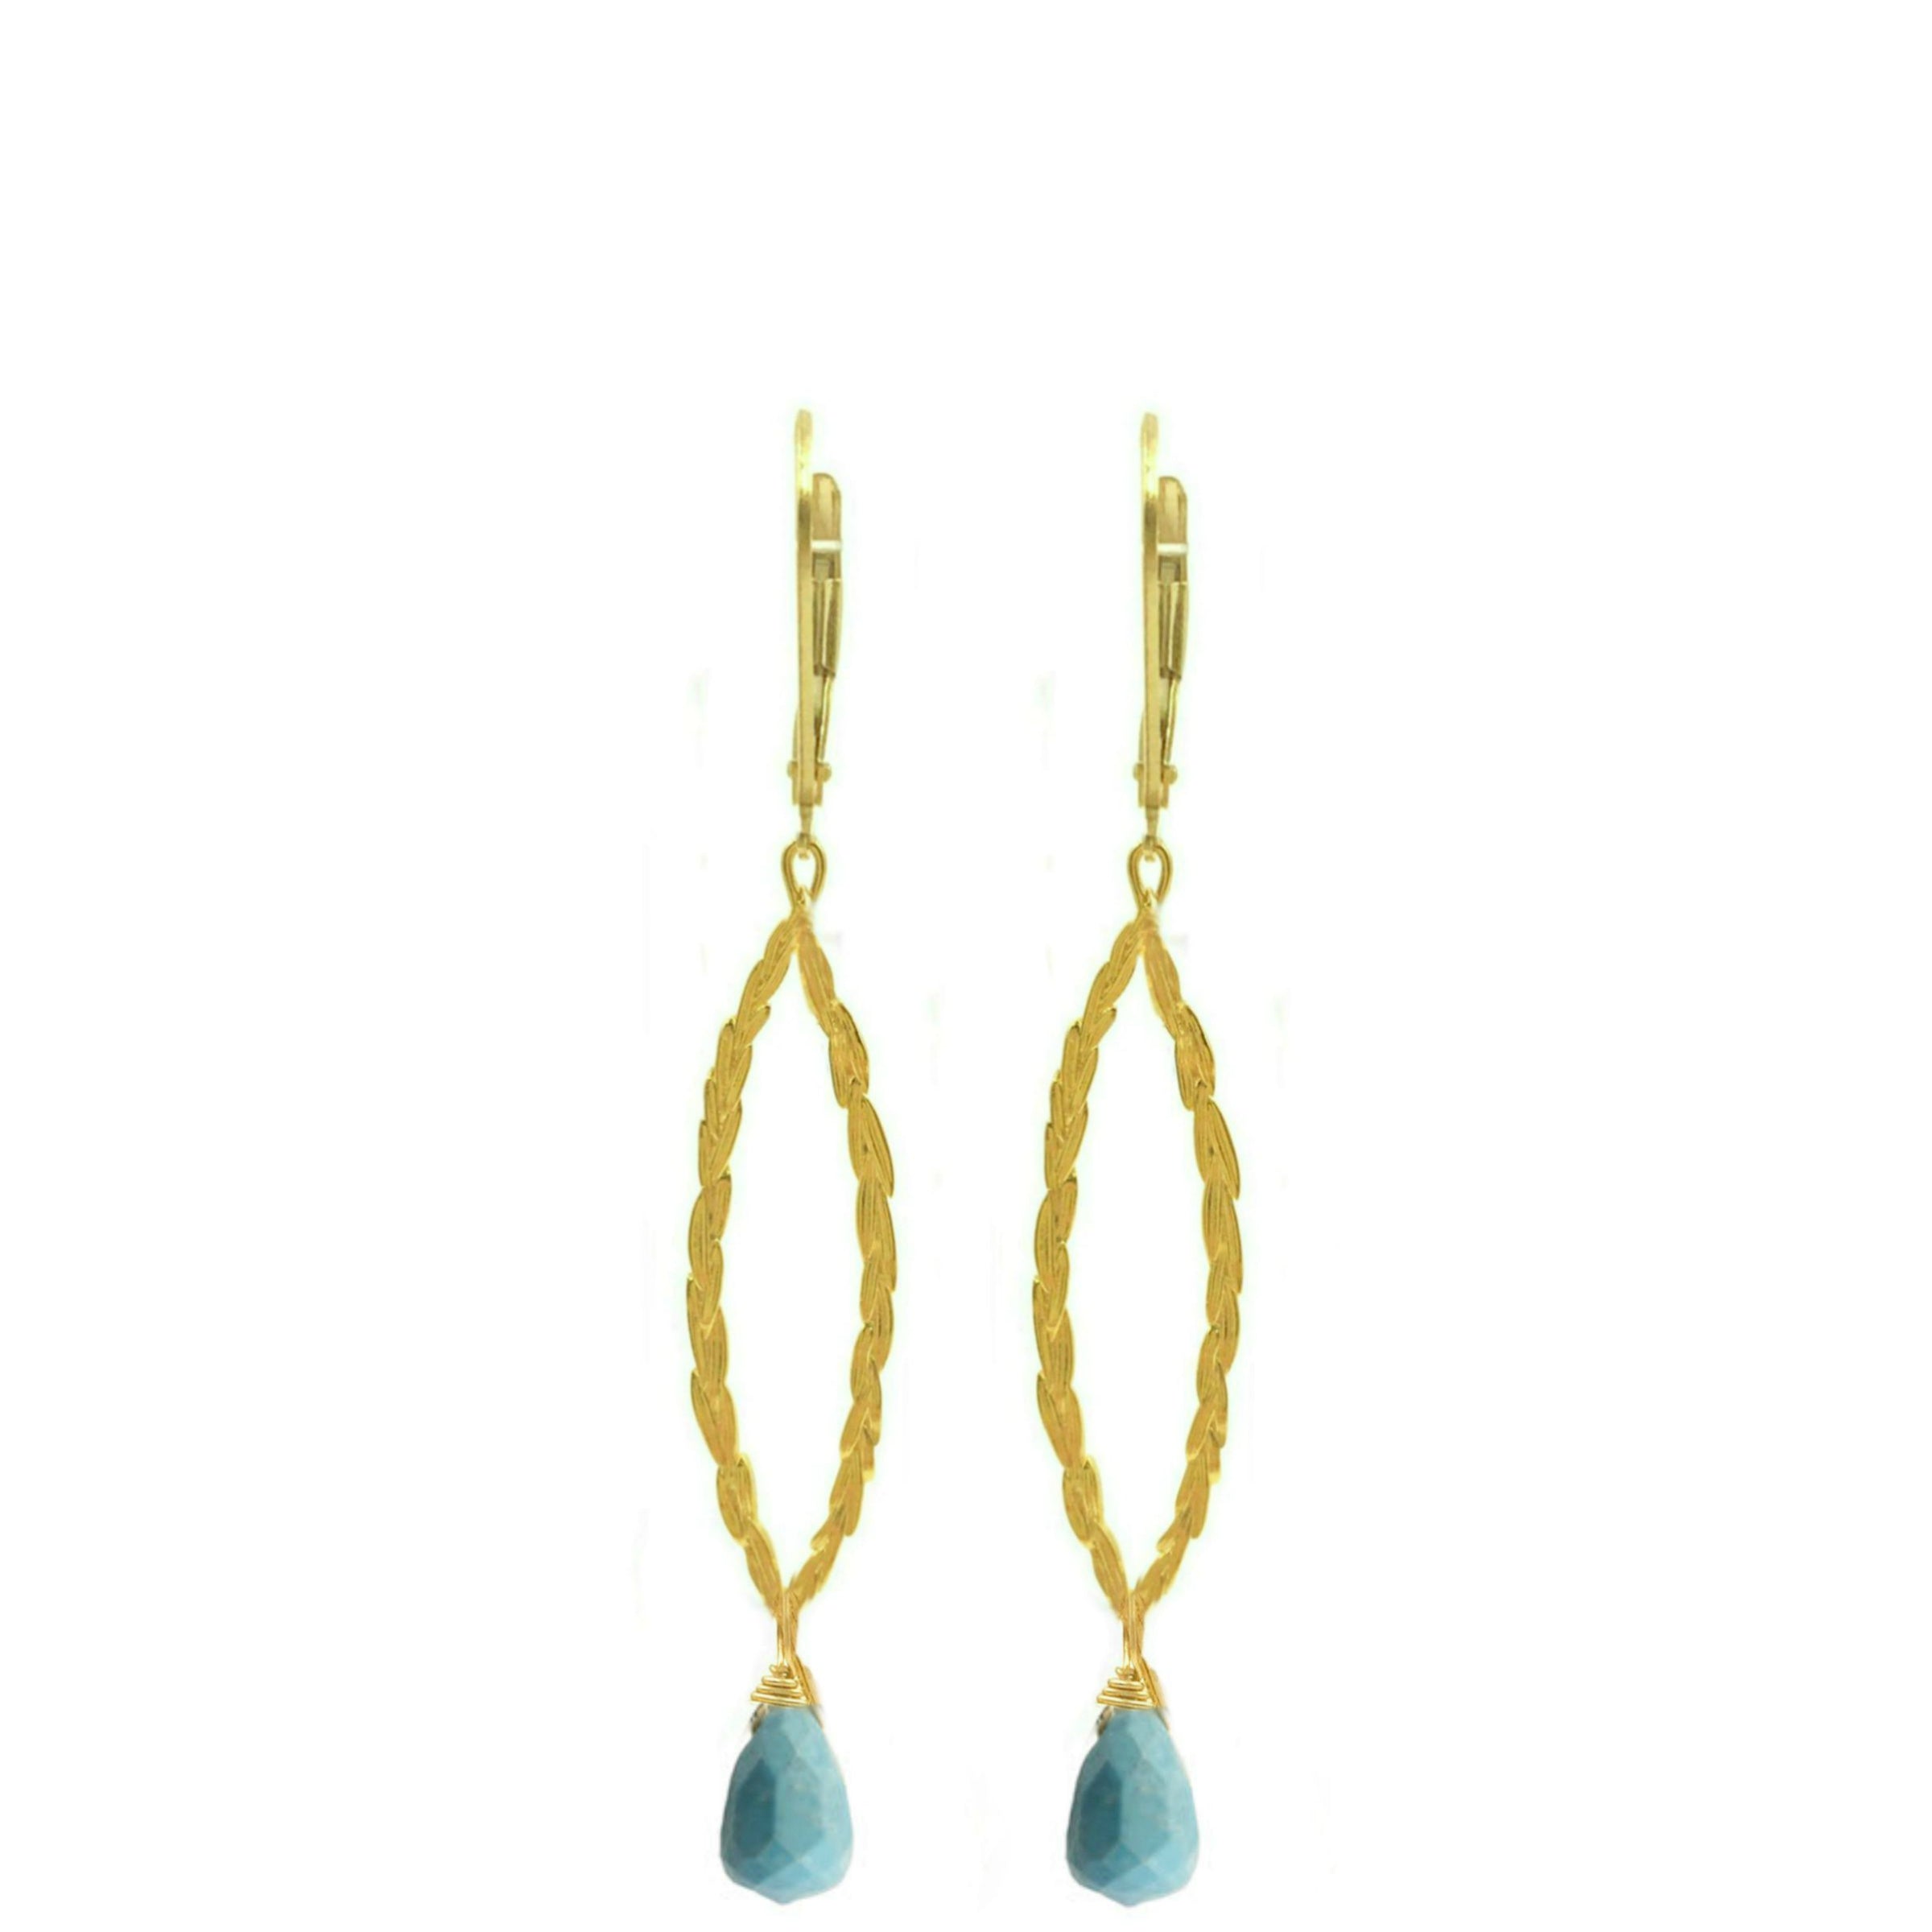 Amor Vincit Omnia Gold PEACE EARRINGS with Turquoise Drop ~ Large & Medium